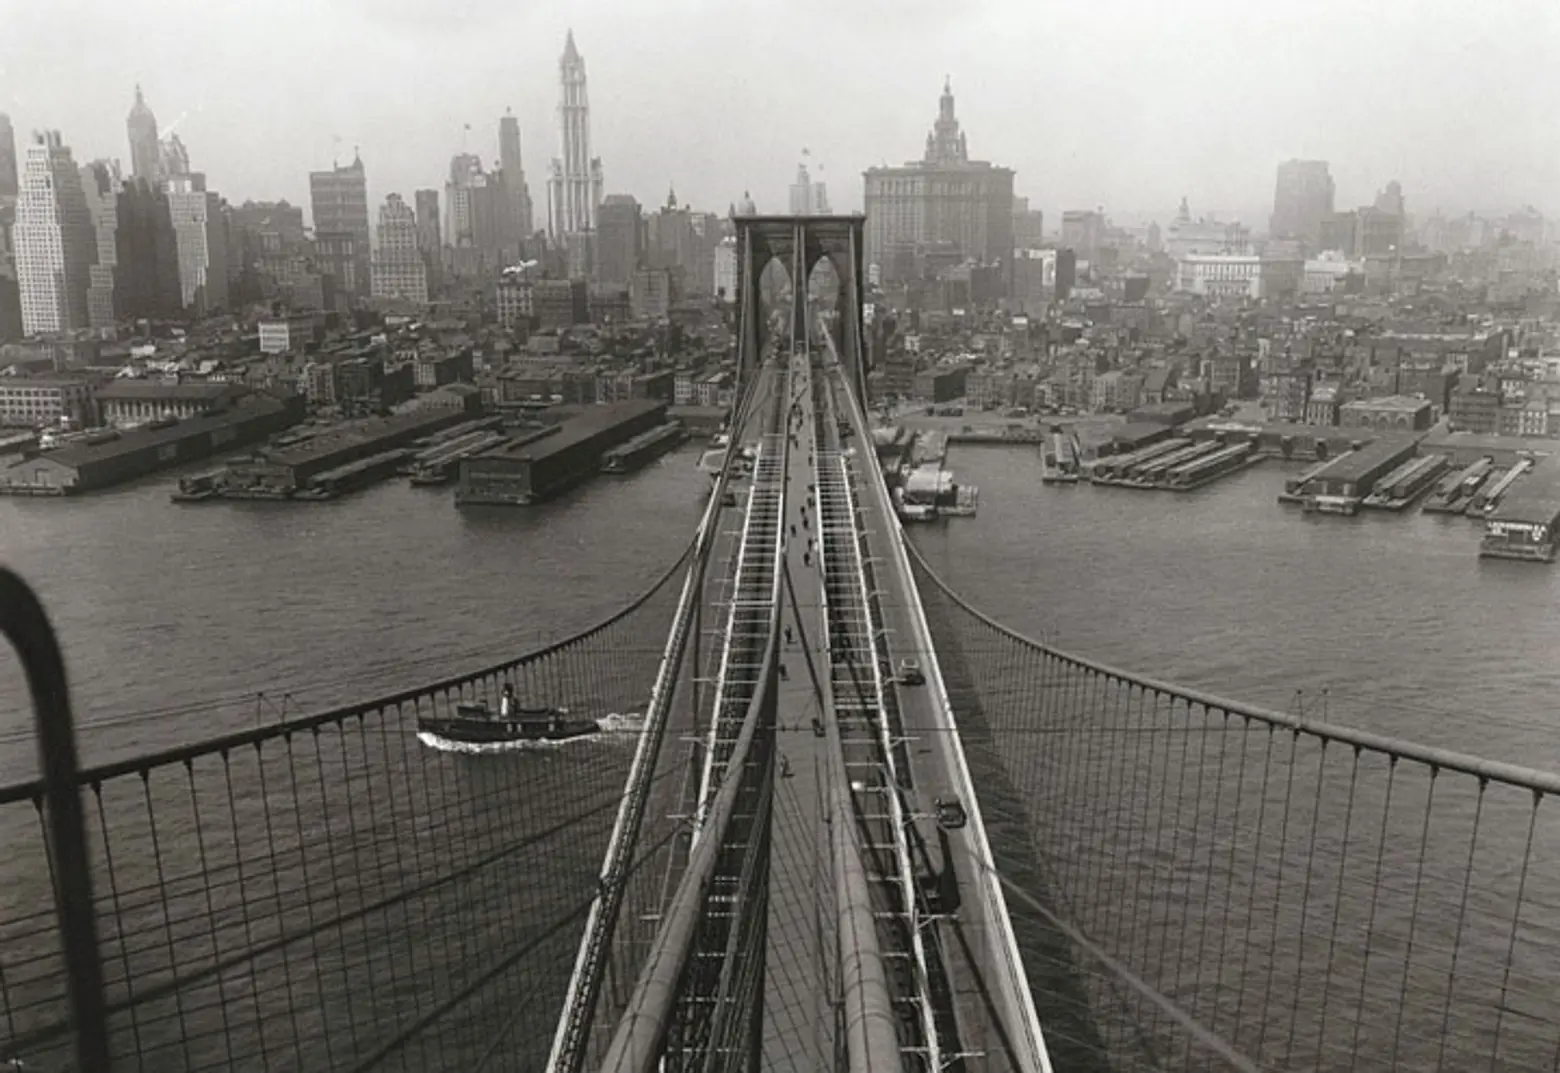 With this incredible shot from on top of the Brooklyn Bridge, you can see parts of the 1933 skyline.